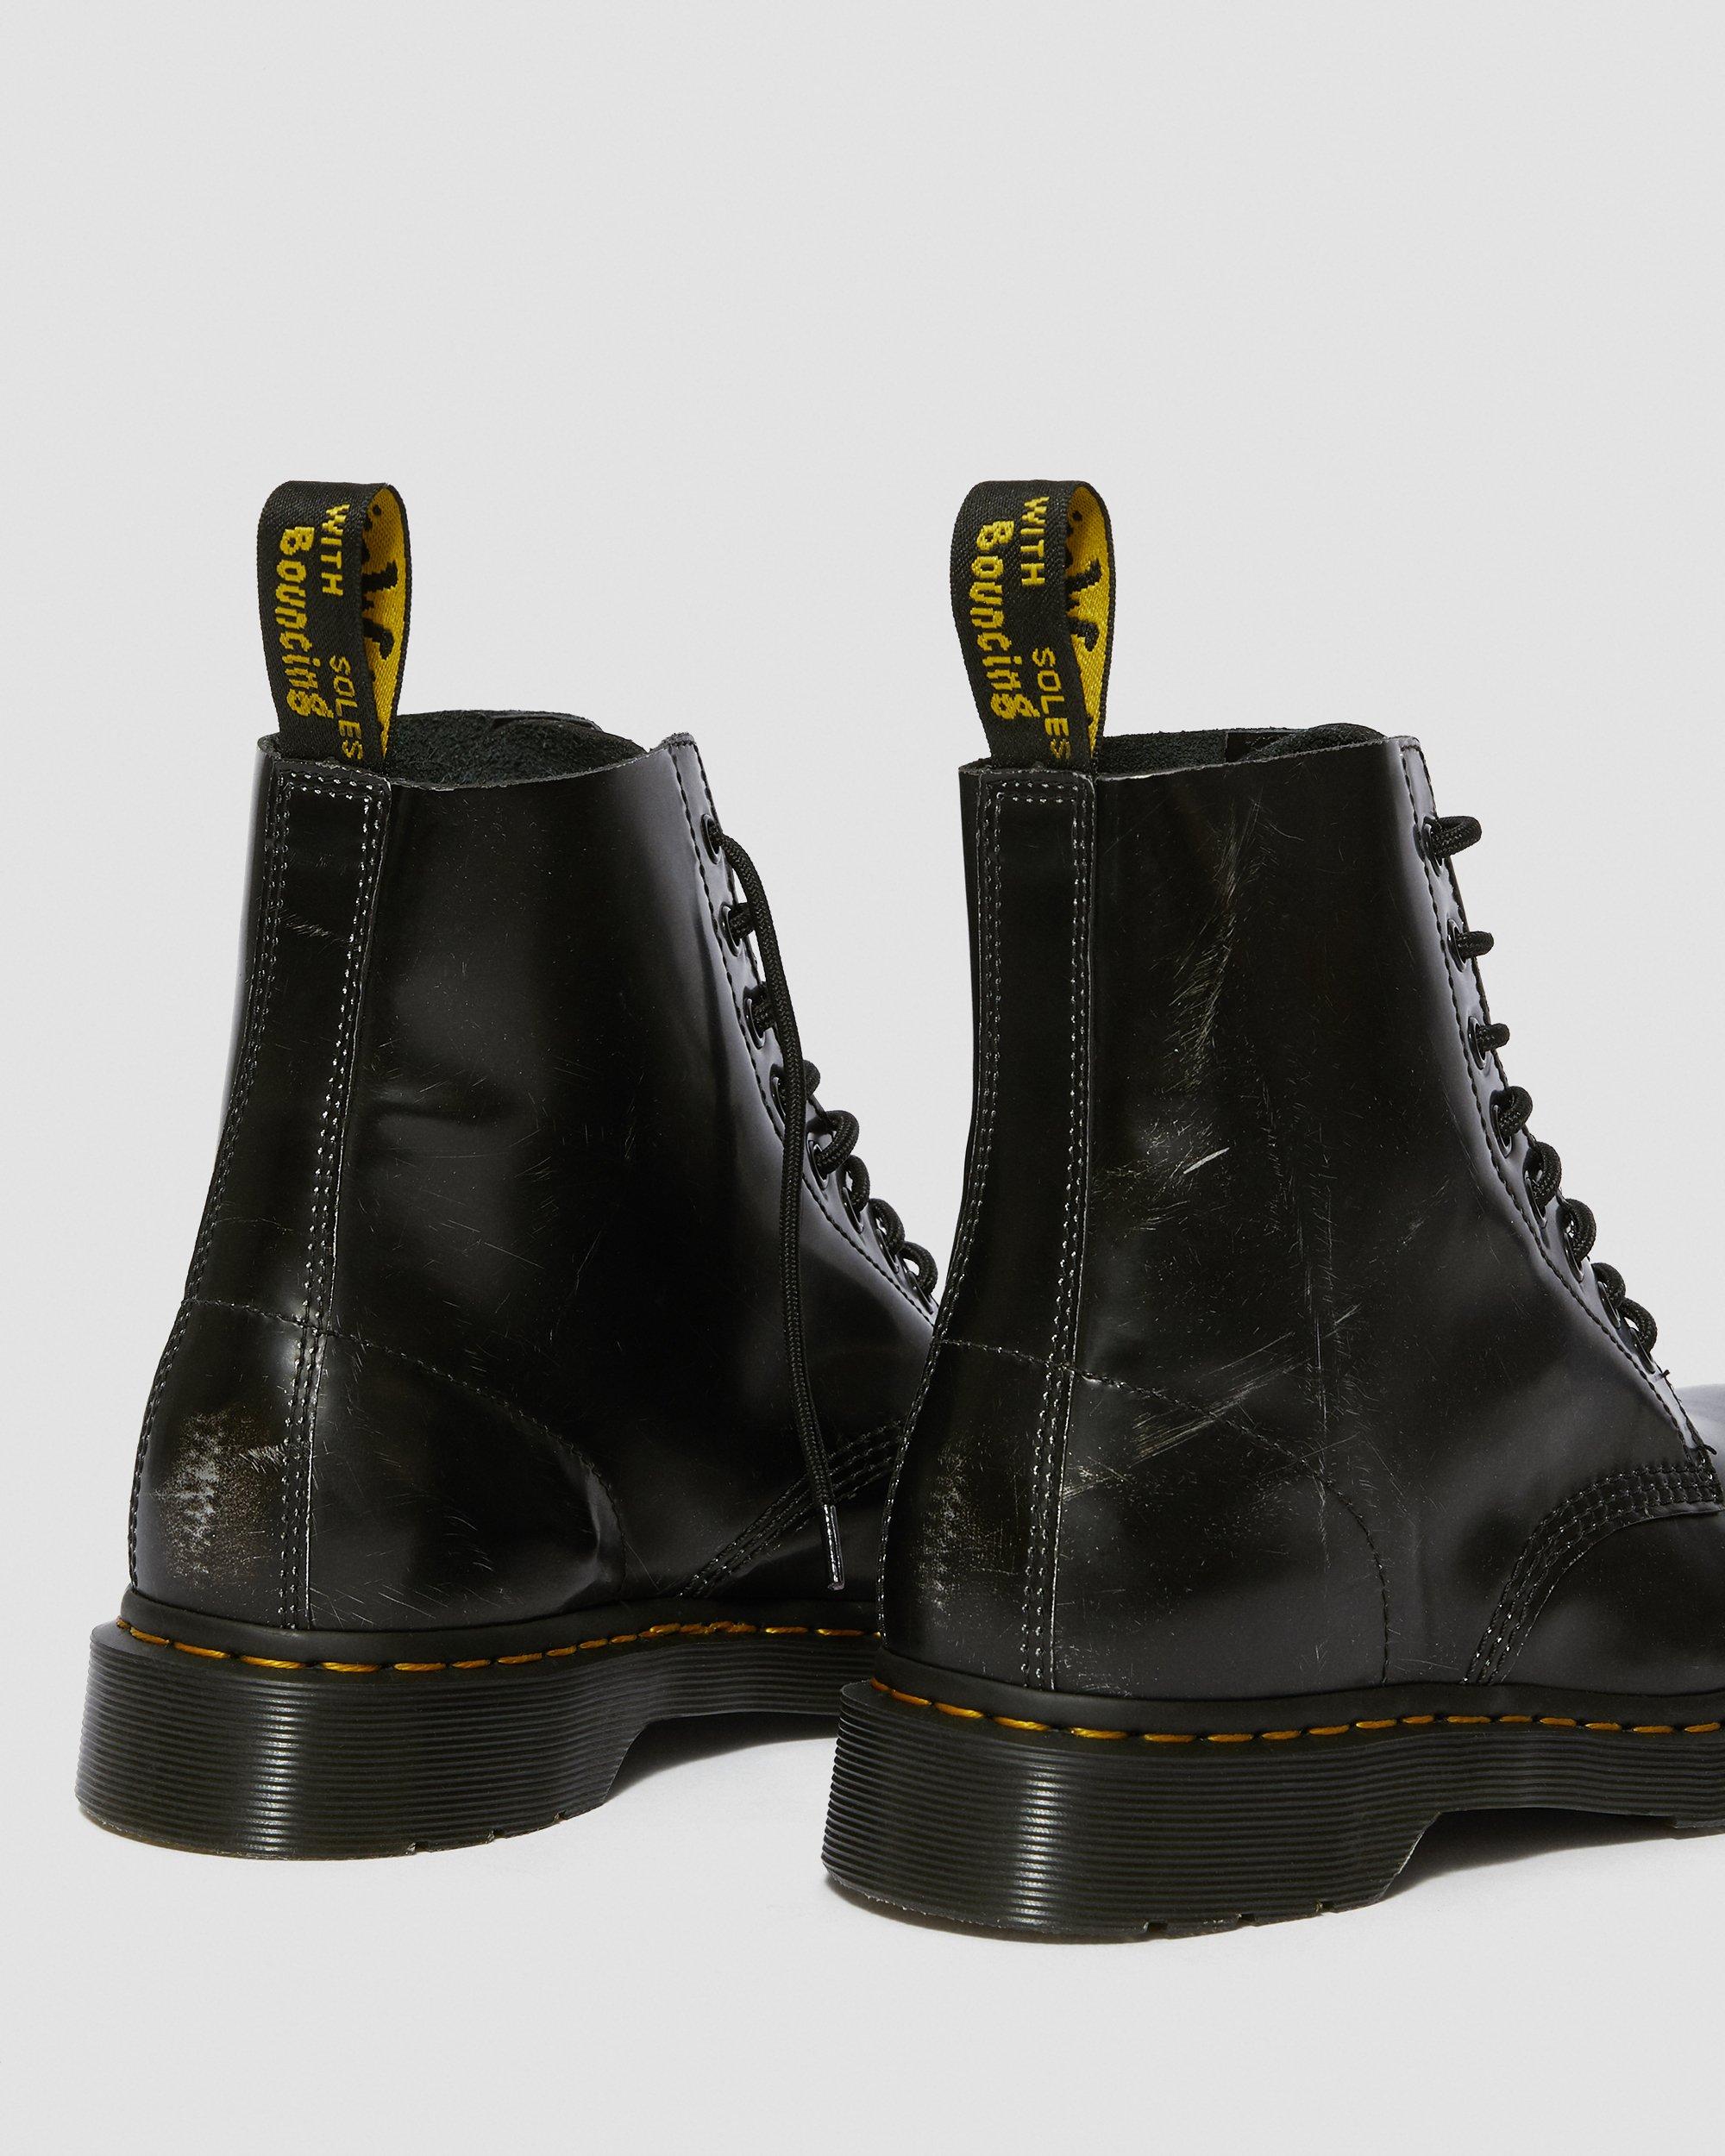 Canberra Bestrating Anesthesie 1460 Pascal Metallic Leather Lace Up Boots | Dr. Martens